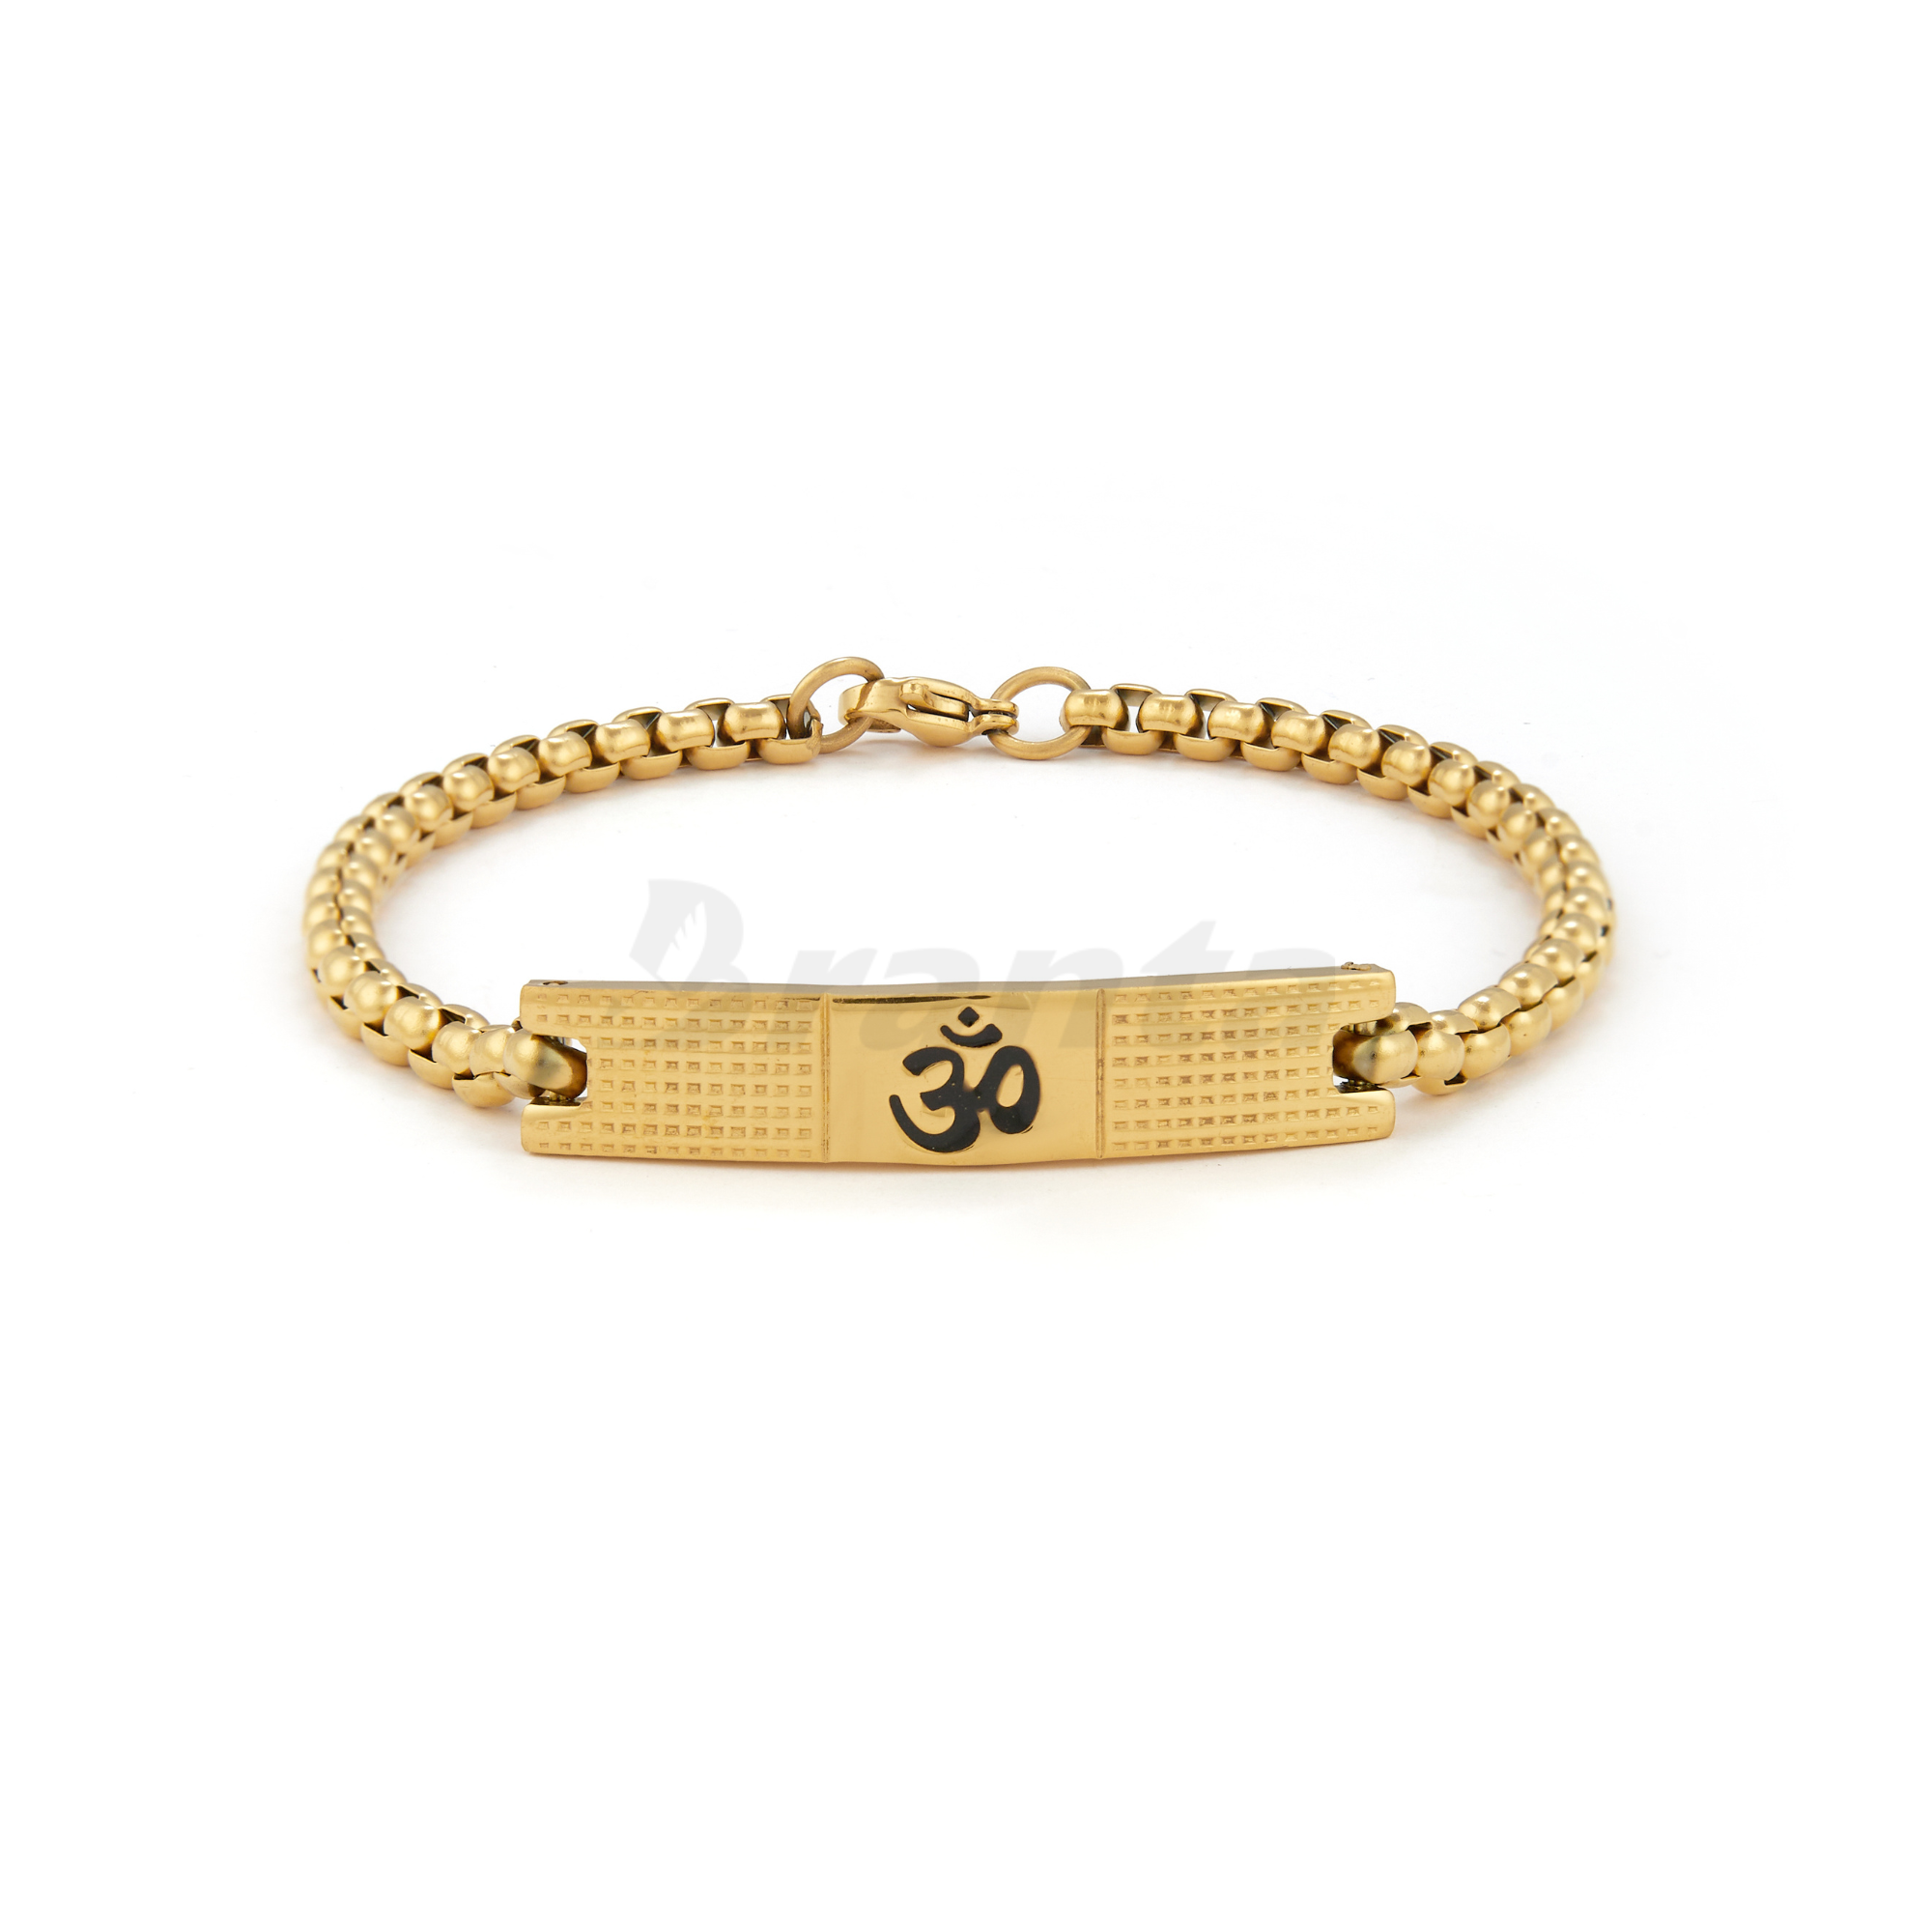 Shubham Jewellers Rehti 925 Sterling Silver Precious Metal Om Charm Bracelet  With 24 Kt Gold Polished Trishool, Pure Cotton Thread For Men, Women, Boys  And Girls (Dual Tone) » Shubham Jewellers Rehti